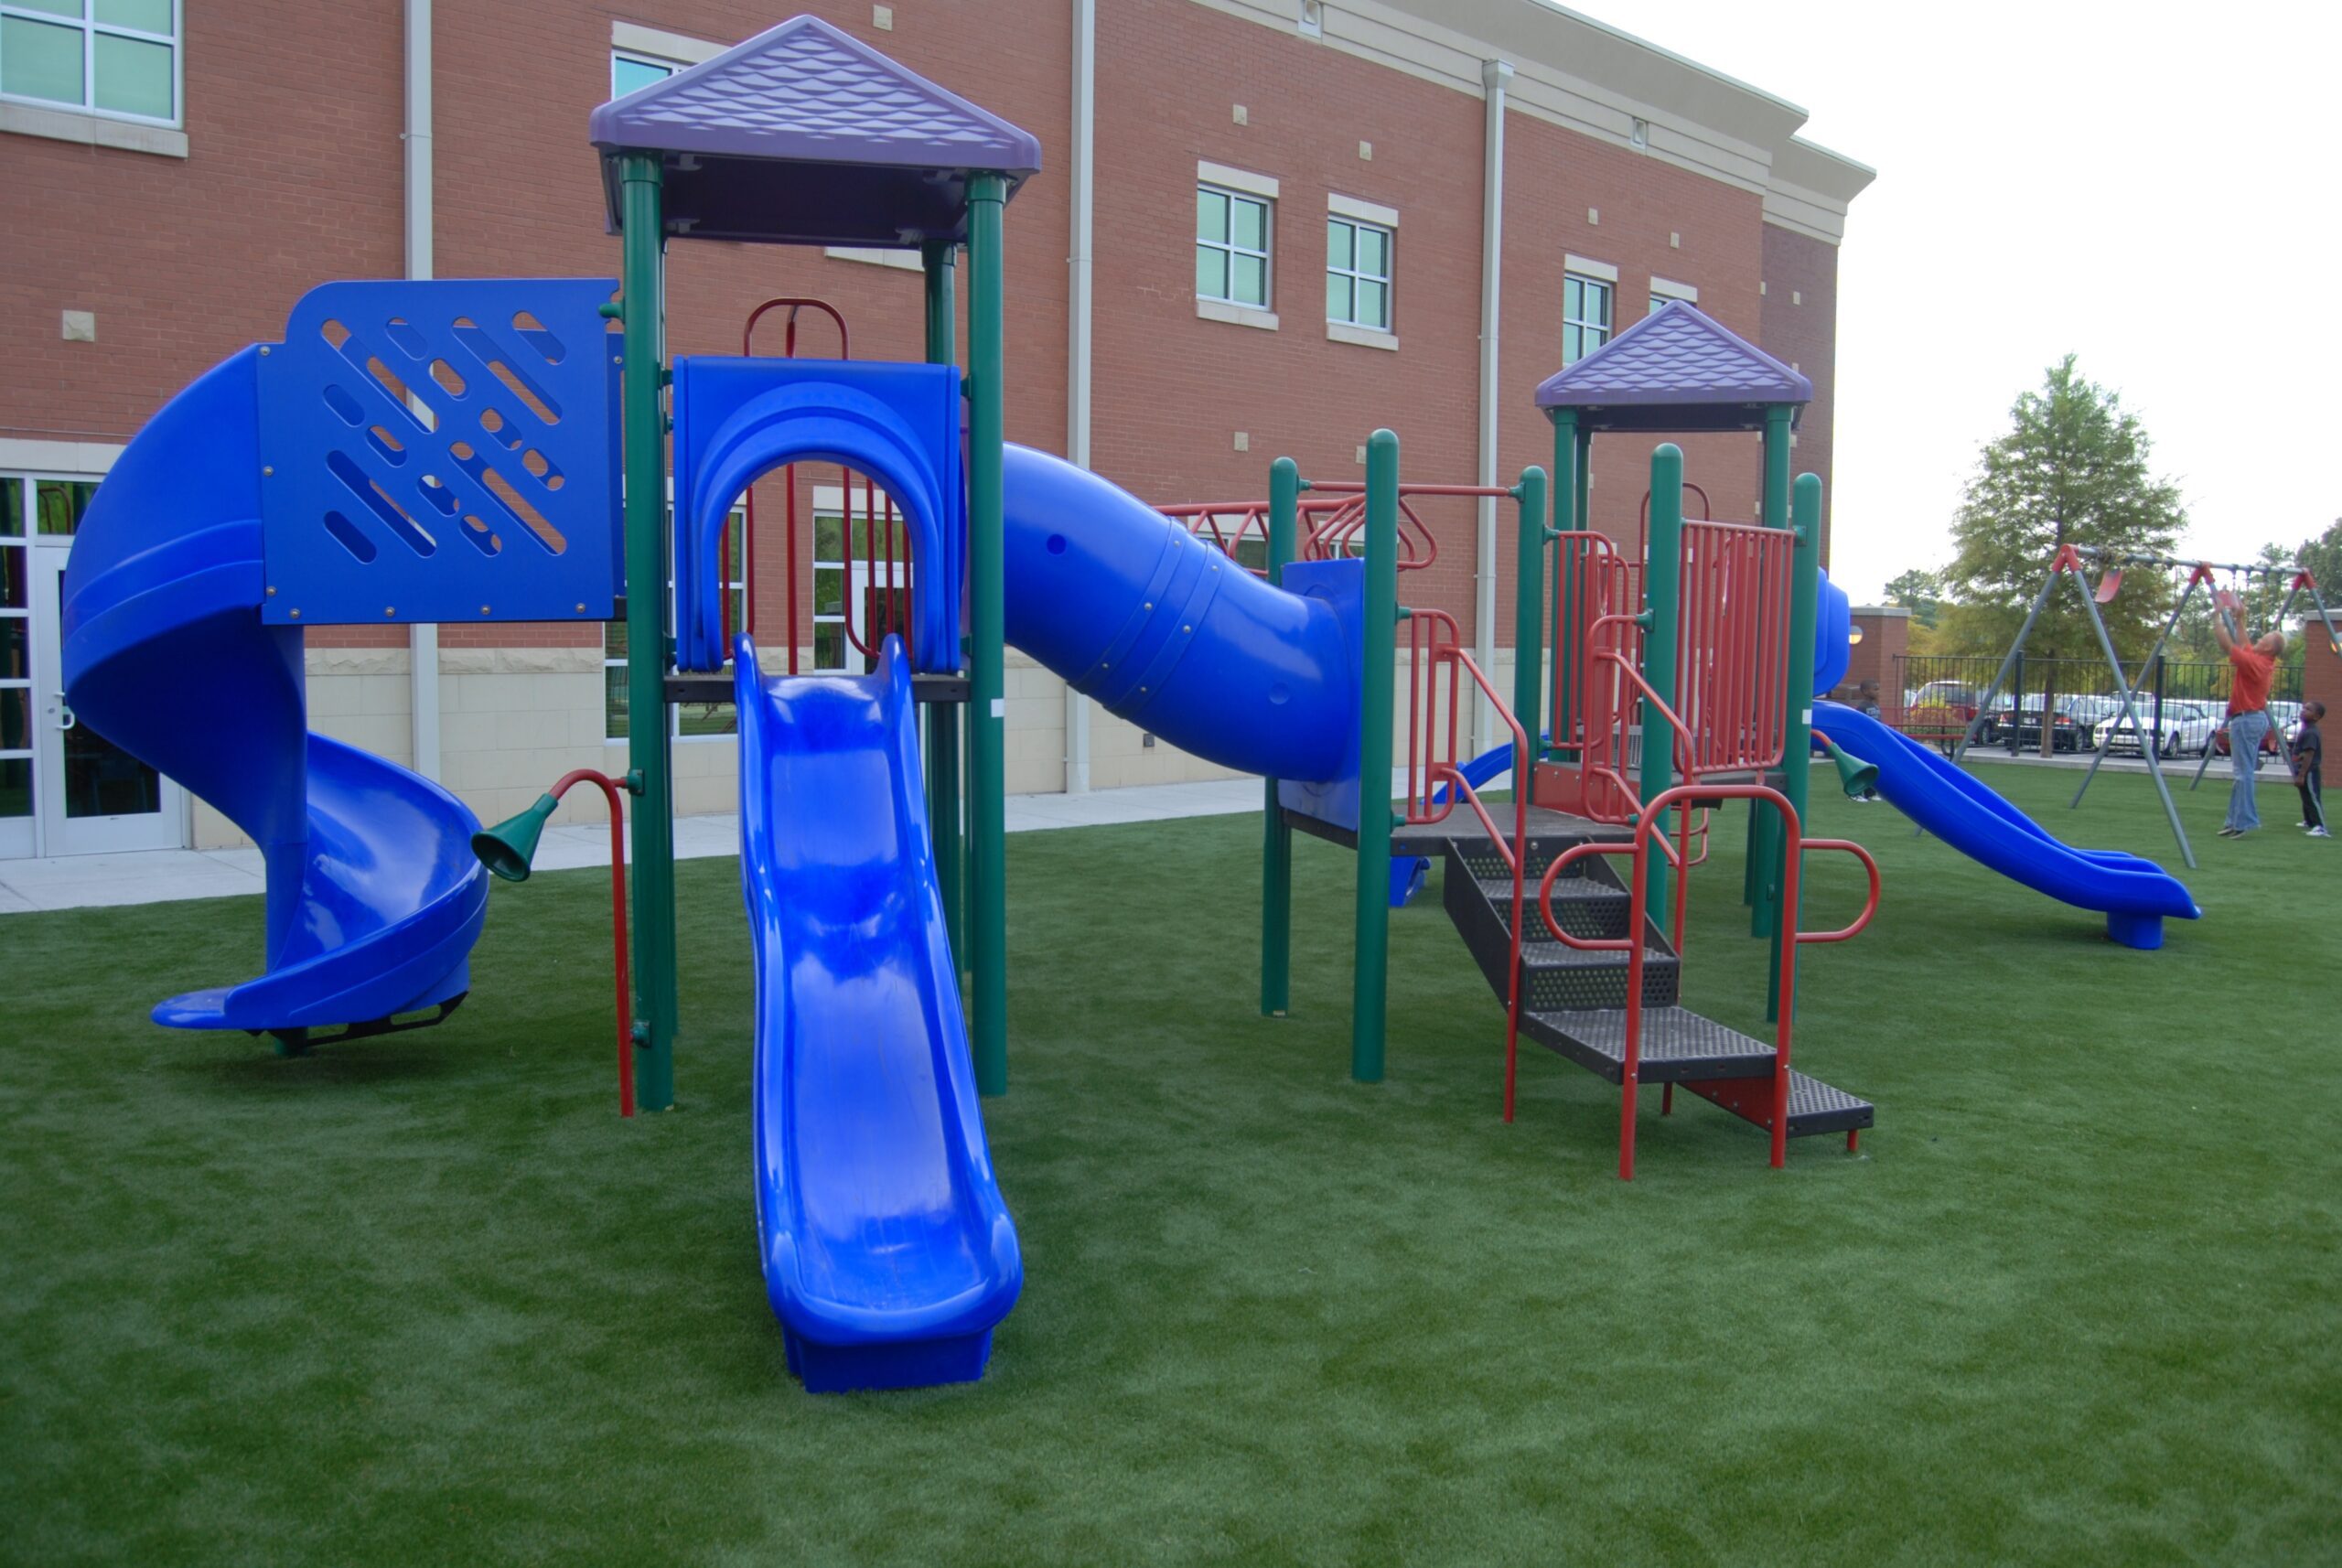 Grass365 offers synthetic grass for playgrounds.